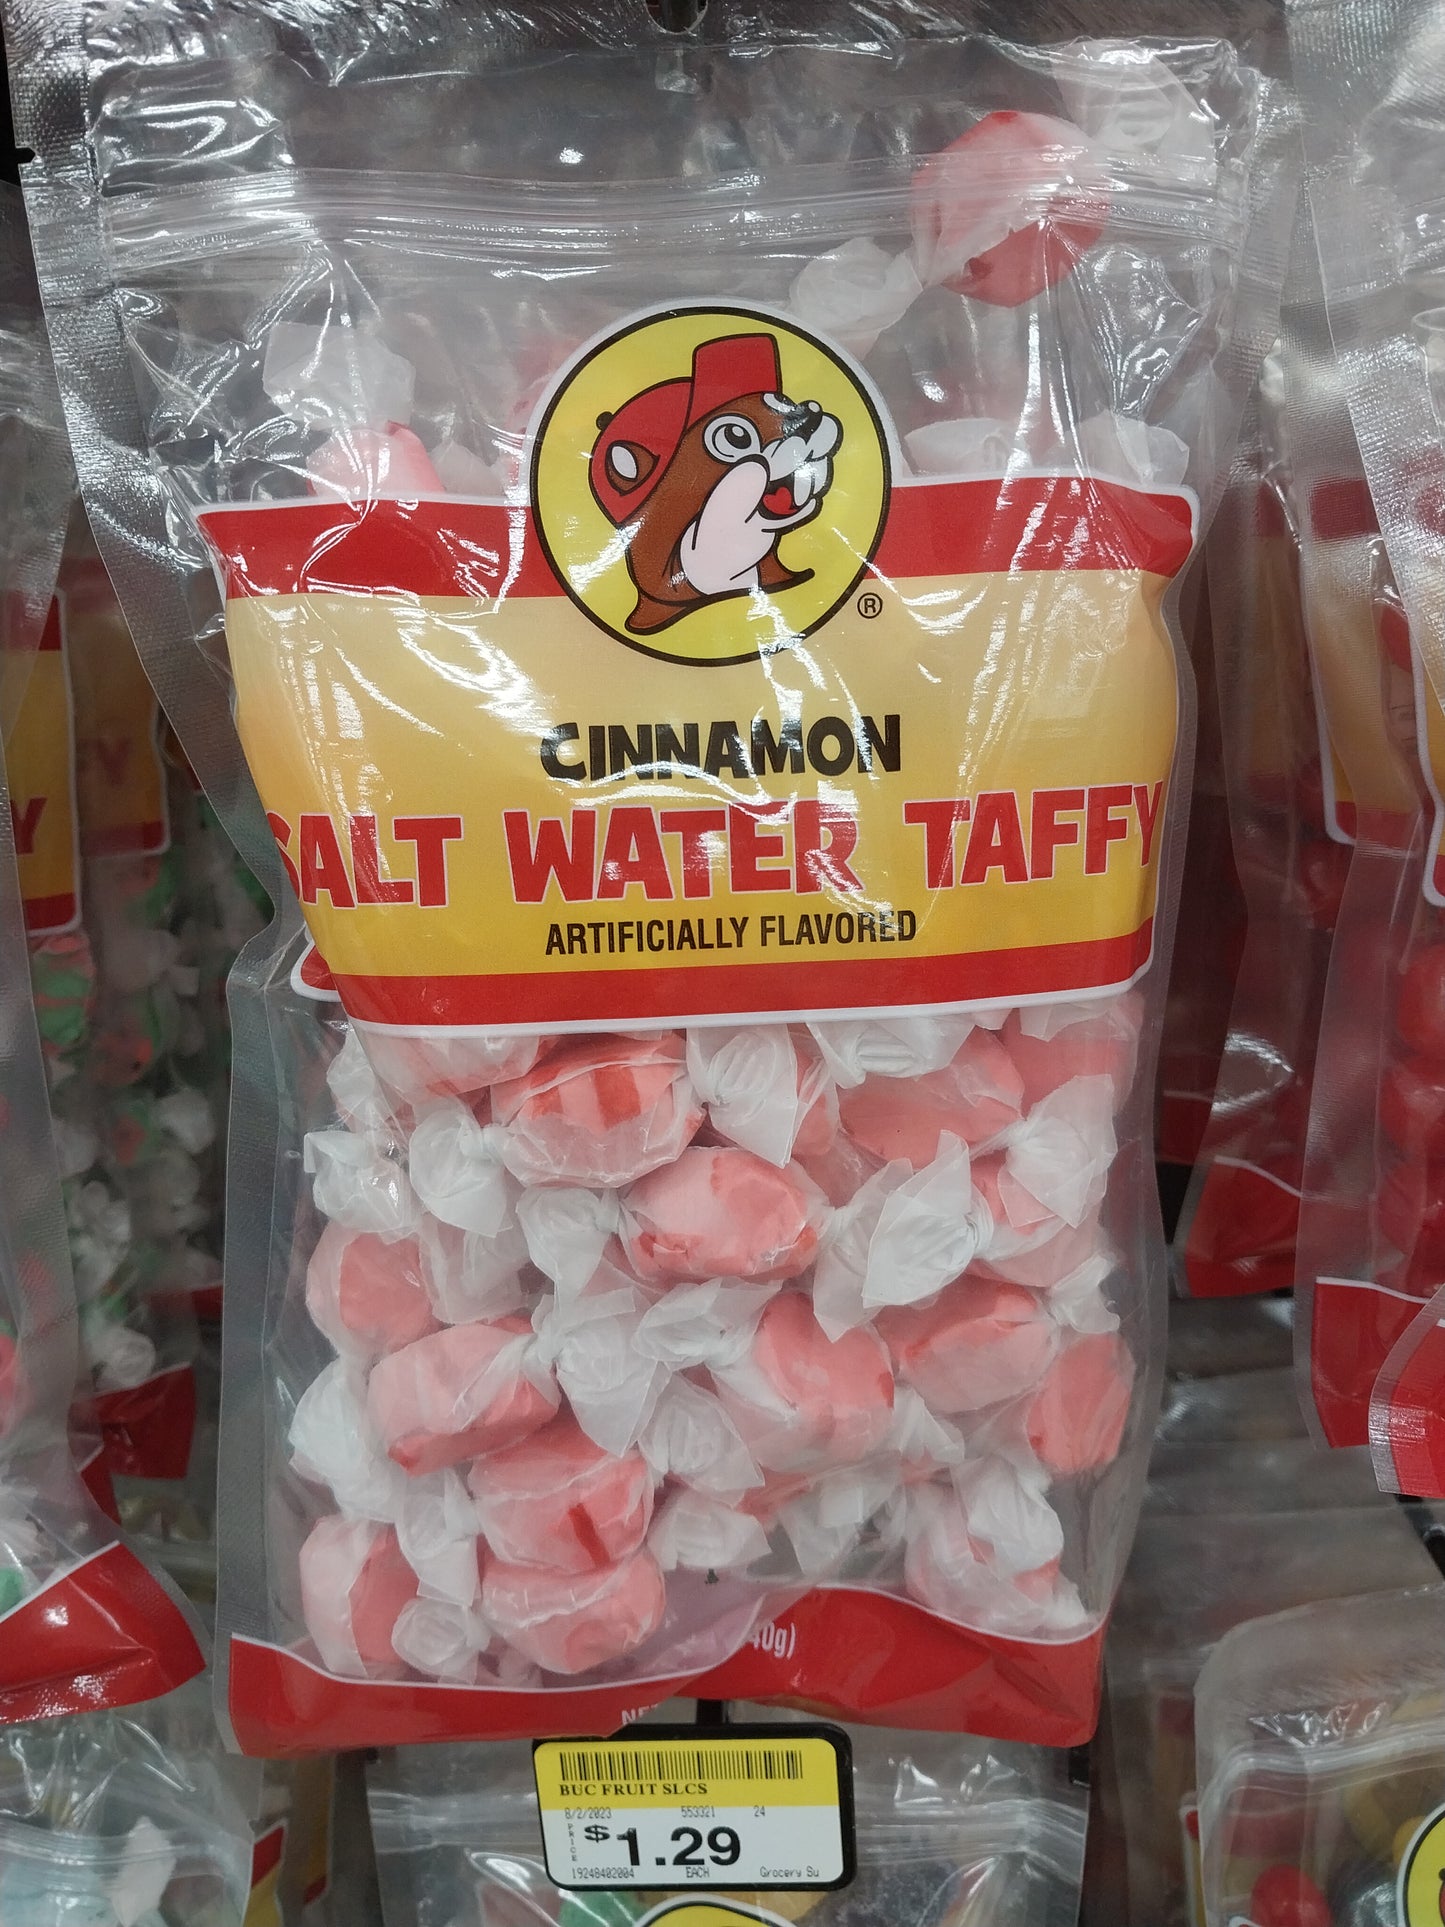 Variety Buc-ee's Bag Salt Water Taffy - Pick Your Flavors